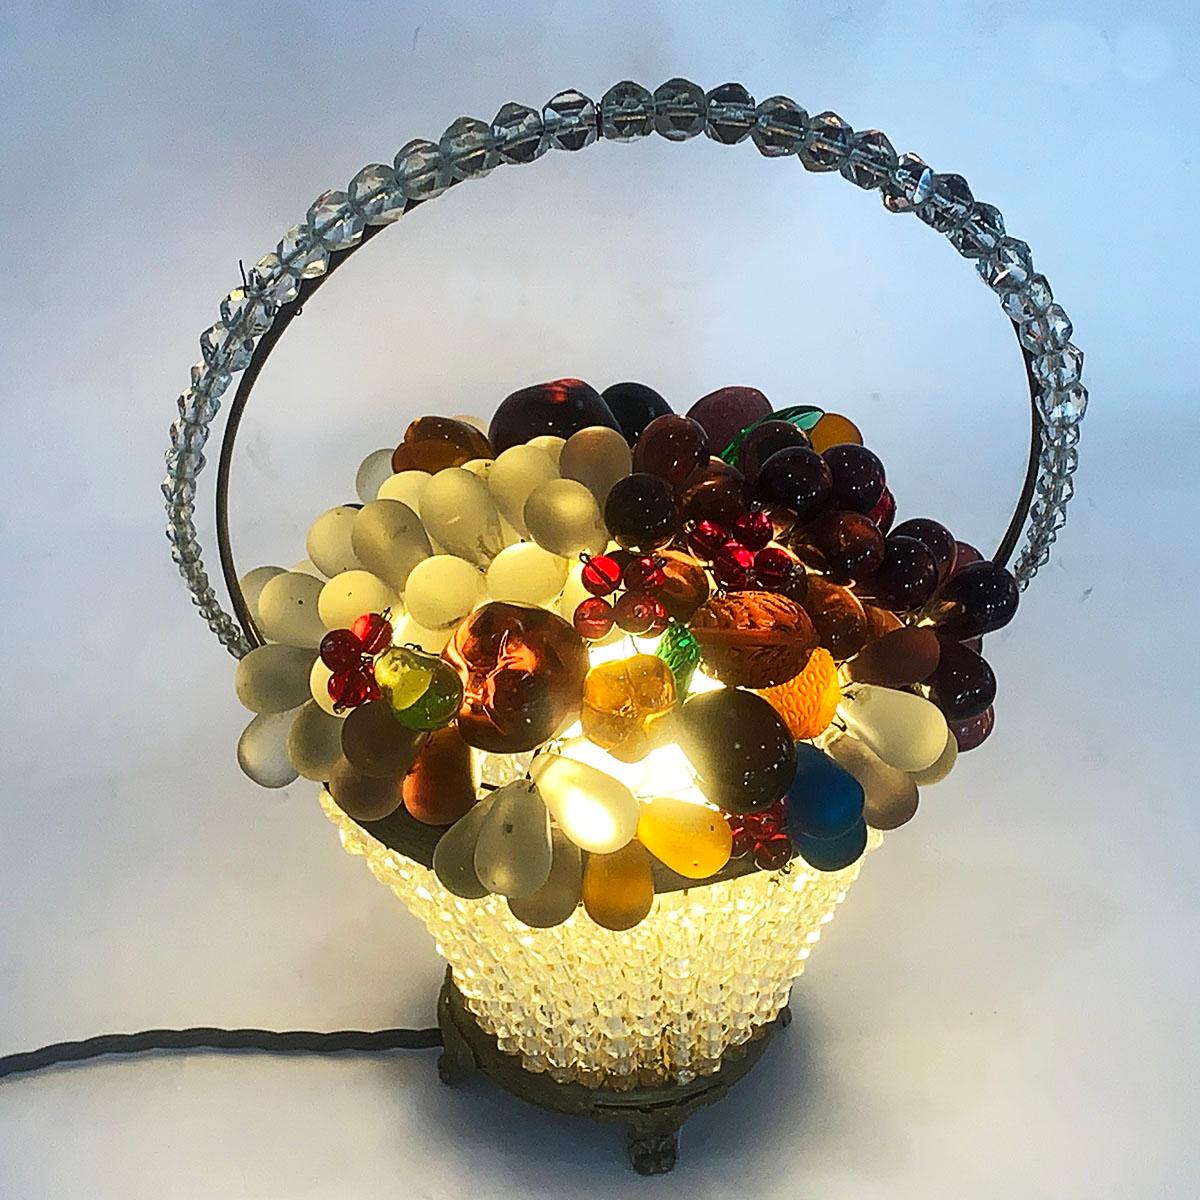 Superb Art Deco fruit basket glass lamp, “Made in Czechoslovakia”, as impressed underneath to the metal. Multiple different glass fruits and leaves in vibrant colors and realistic shapes, the bronze tone metalwork is intricately decorated with